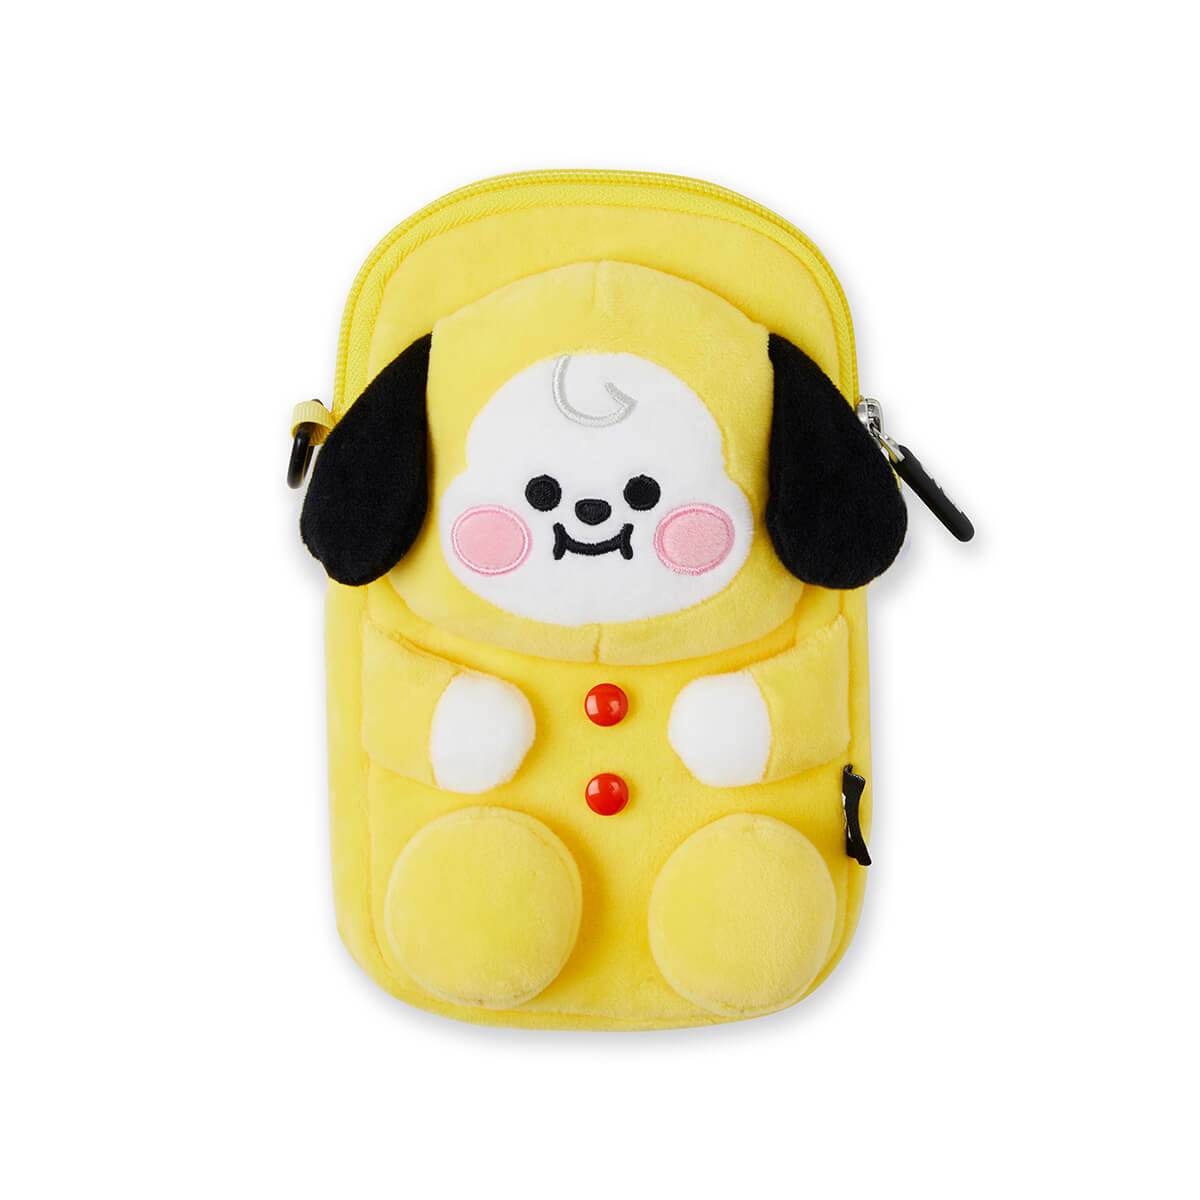 Blyss ⋈ on X: Spotted super adorable BT21 plush cross sling bag! Talk abt  cute useful bag for Armys 👍😆 no RJ and Shooky plush bag in Myeongdong  store tho #BT21  /